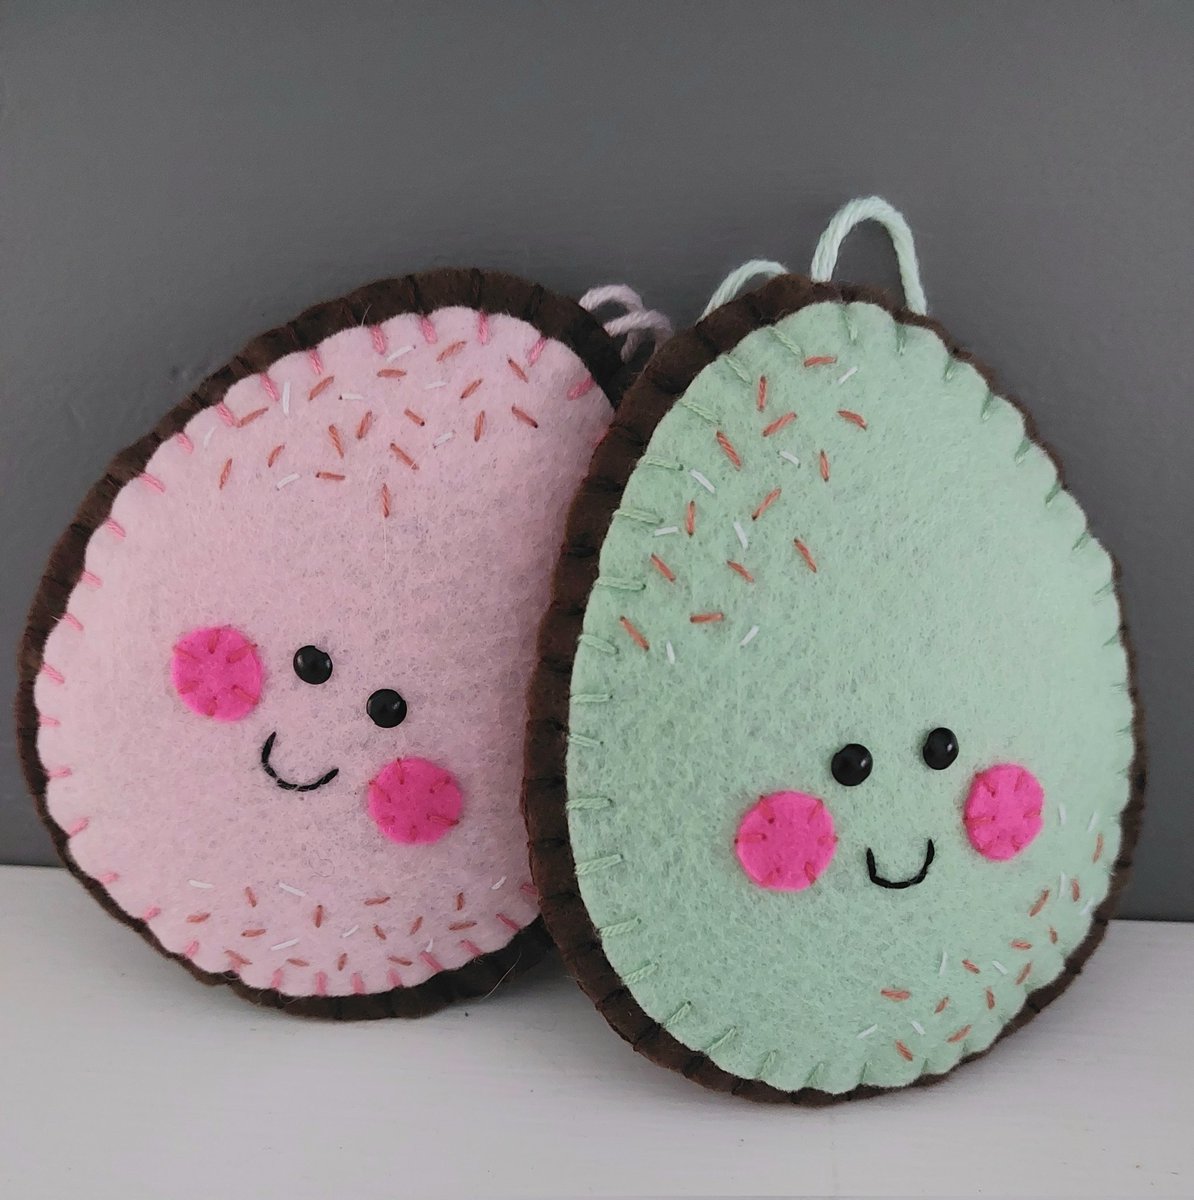 Spring eggs!! (Not just for Easter🥚) inspired by those little chocolatey ones we all like so much 😋 #eggs #eastereggs #springdecorations #easterdecorations #pastelcolours #handmadehour #CraftBizParty #craftuk #Supportsmall #shopsmall